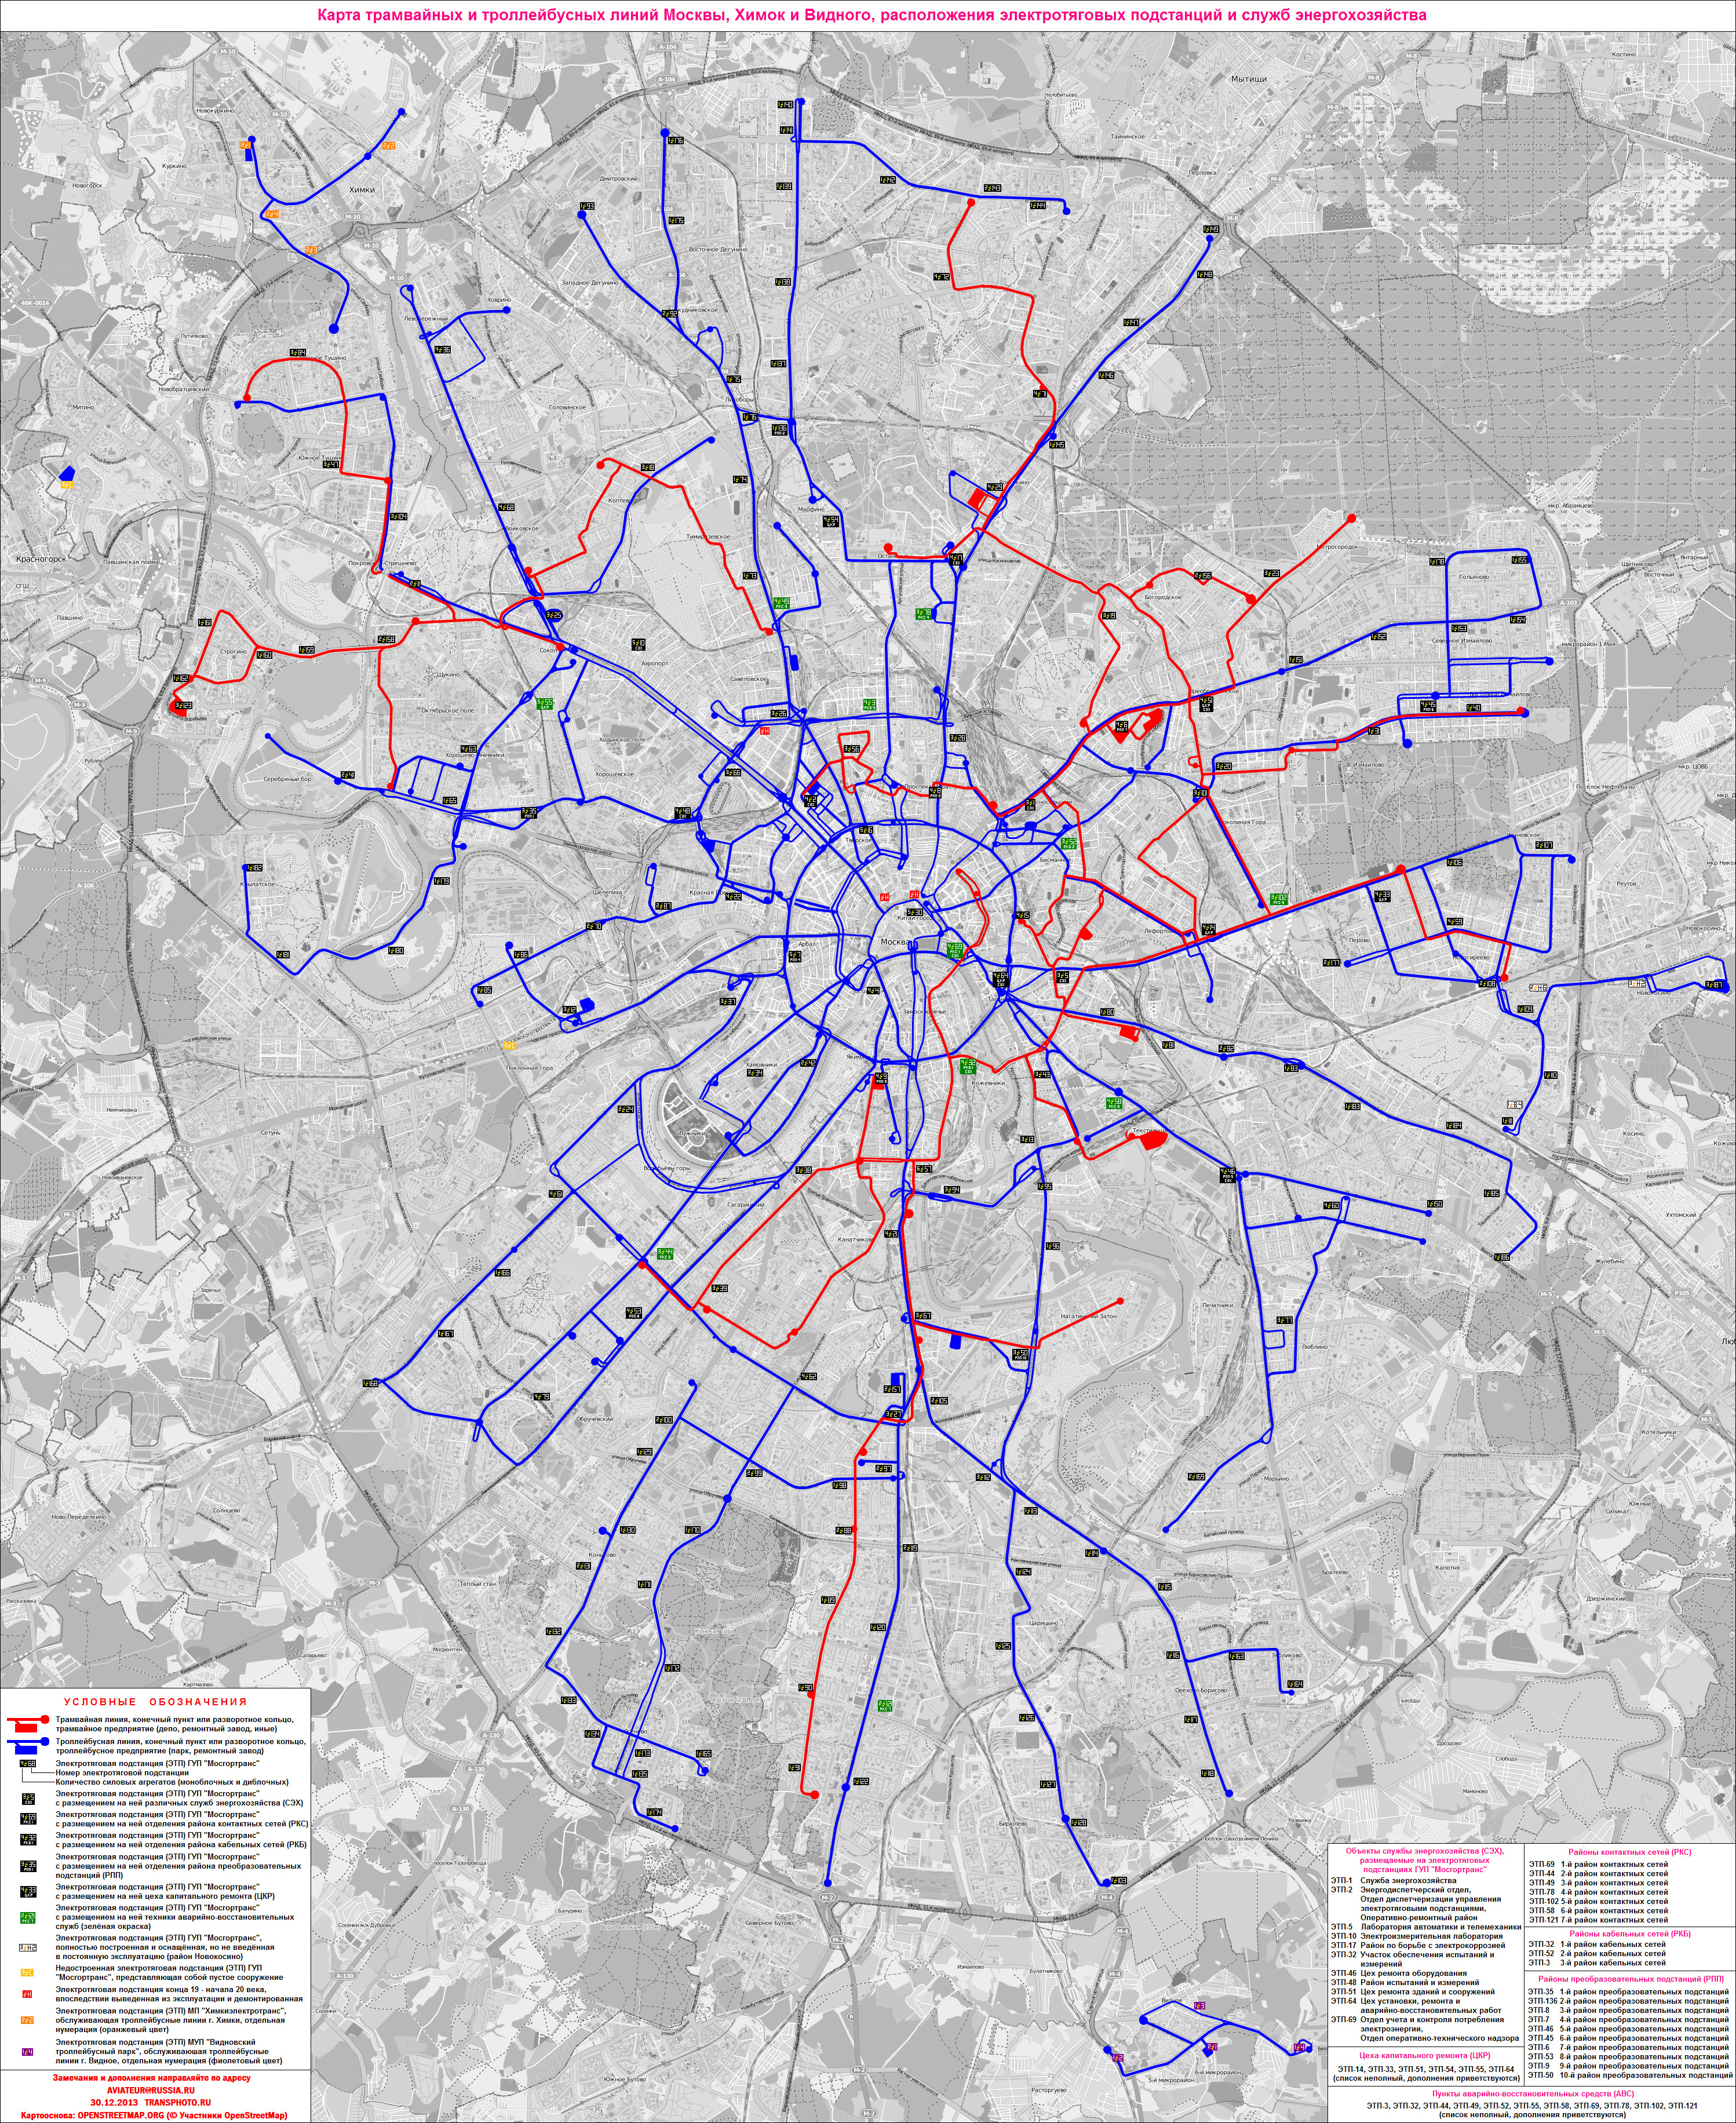 Moscova — Citywide Maps; Moscova — Electric power service — Traction electric station; Khimki — Maps; Vidnoye — Maps; Moscova — Tramway and Trolleybus Infrastructure Maps